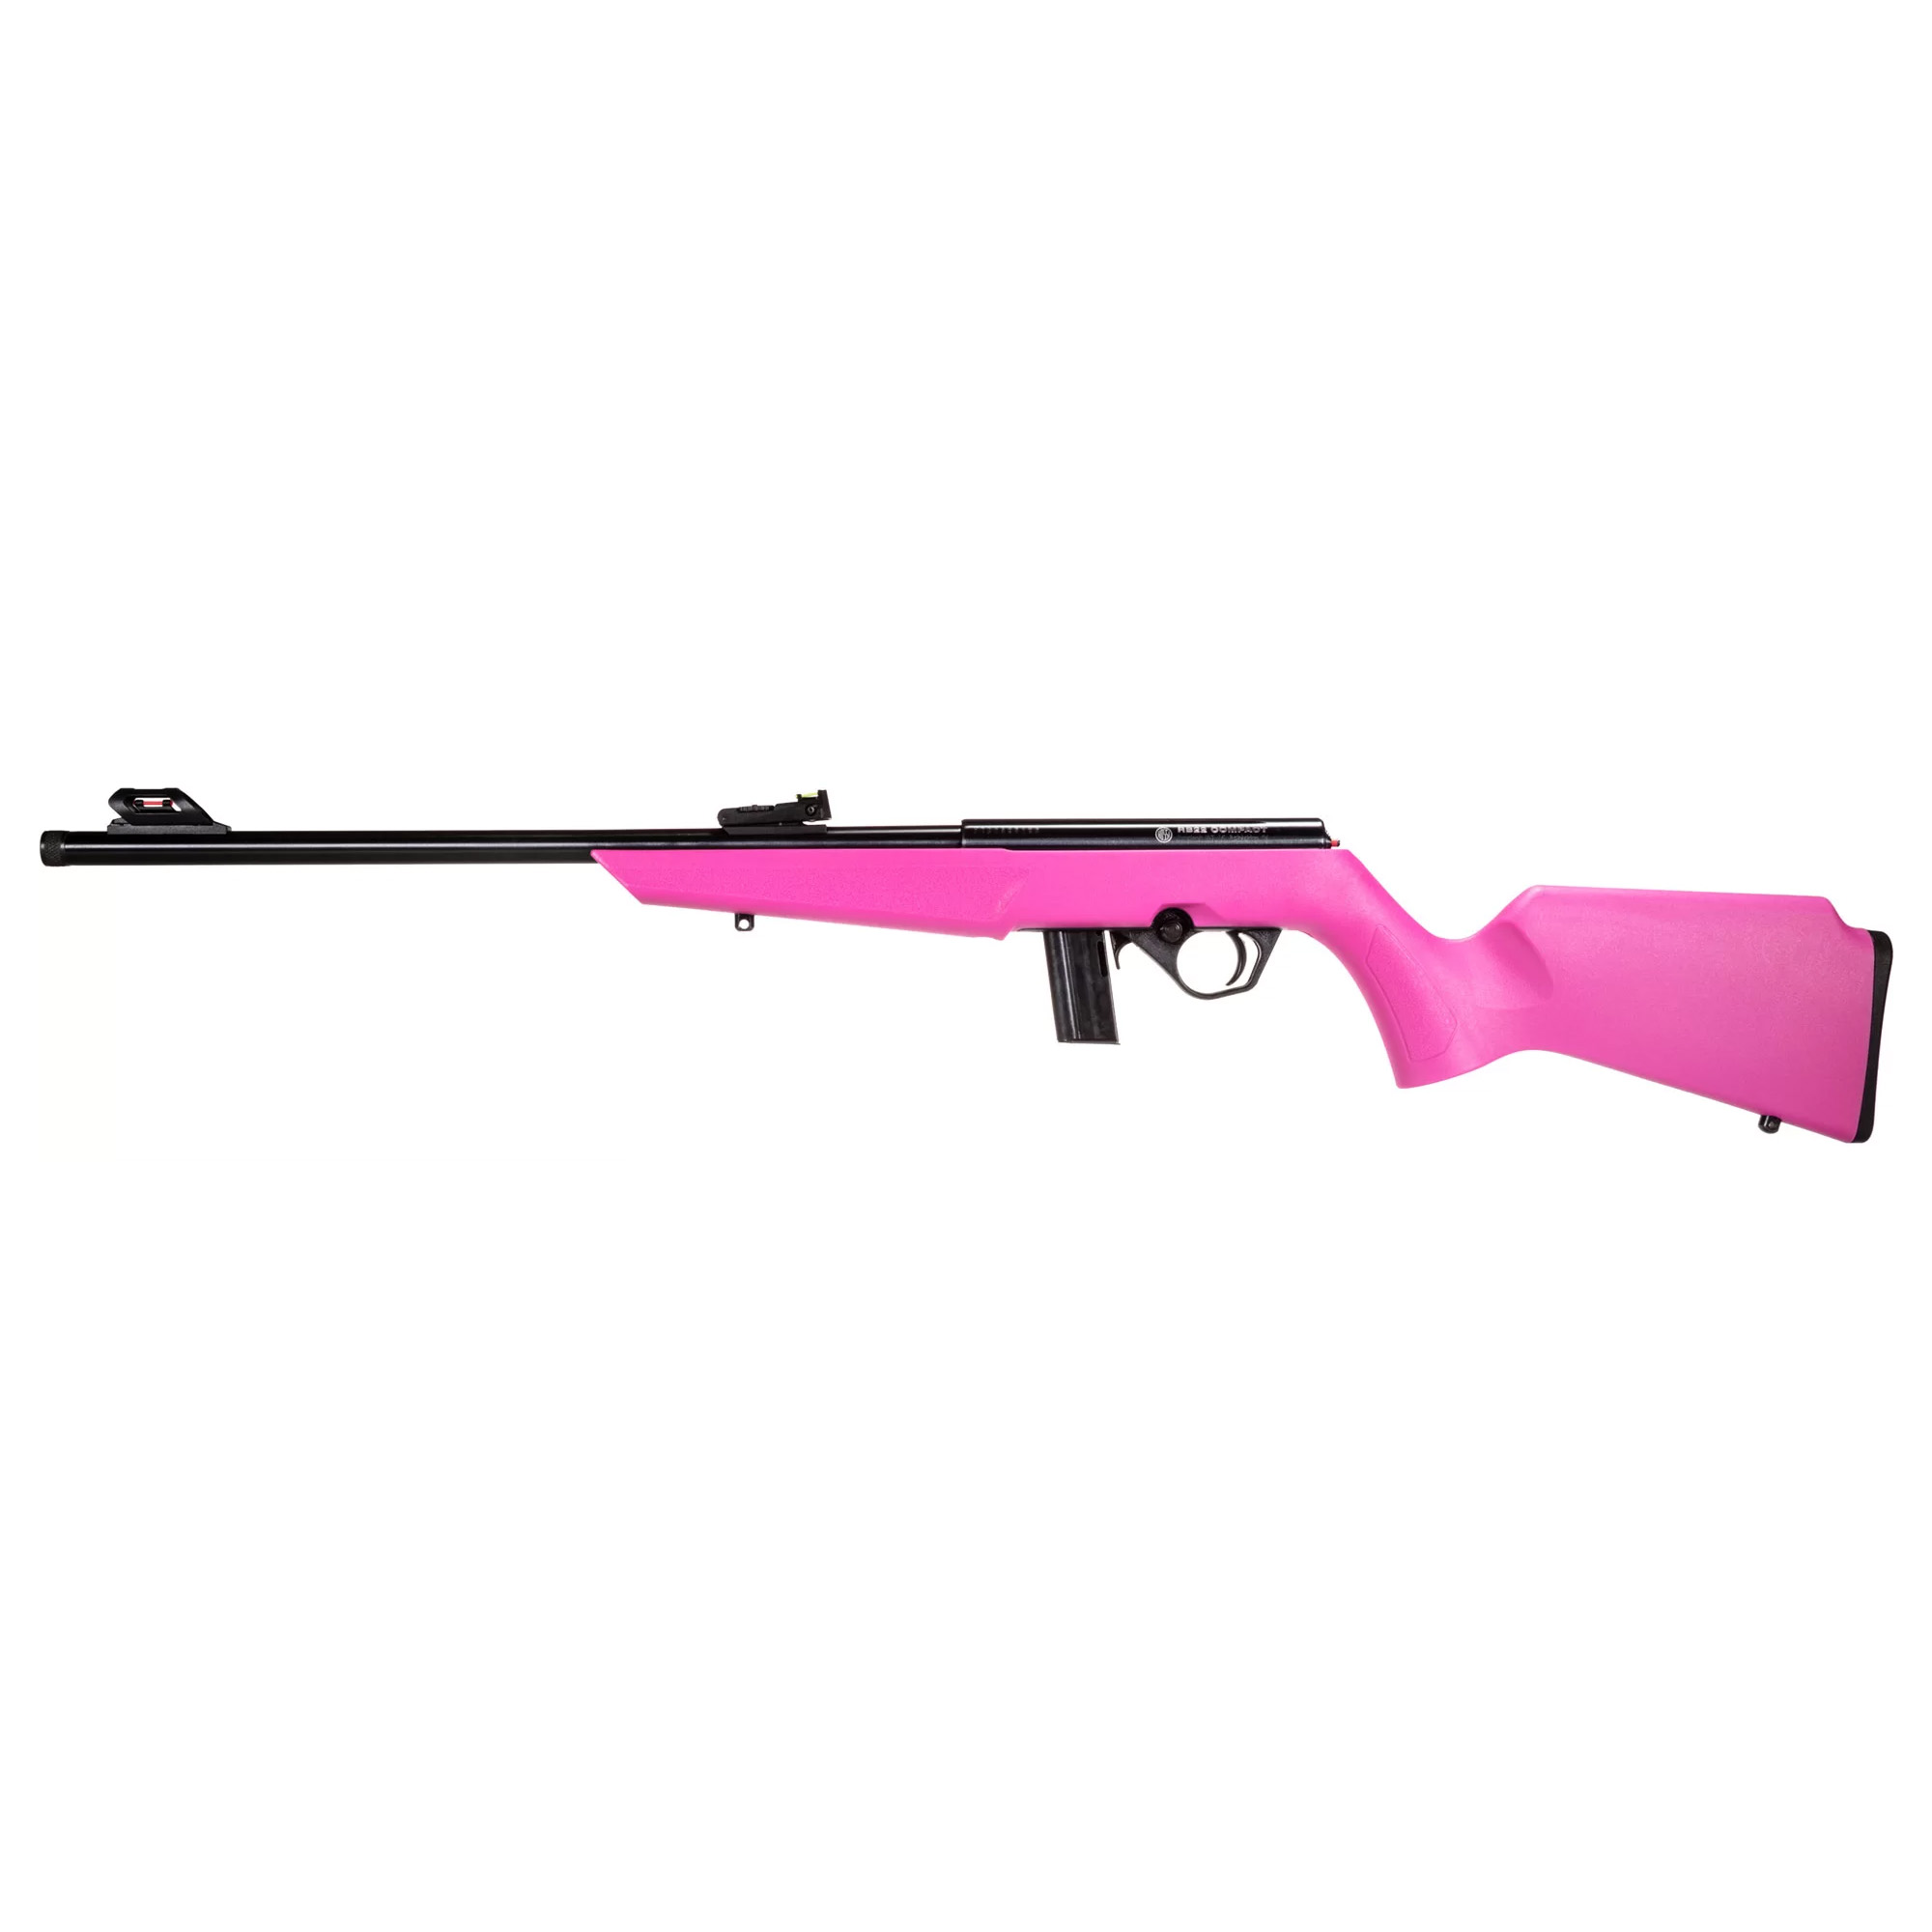 ROSSI RB 22LR 16 10RD COMPACT PINK